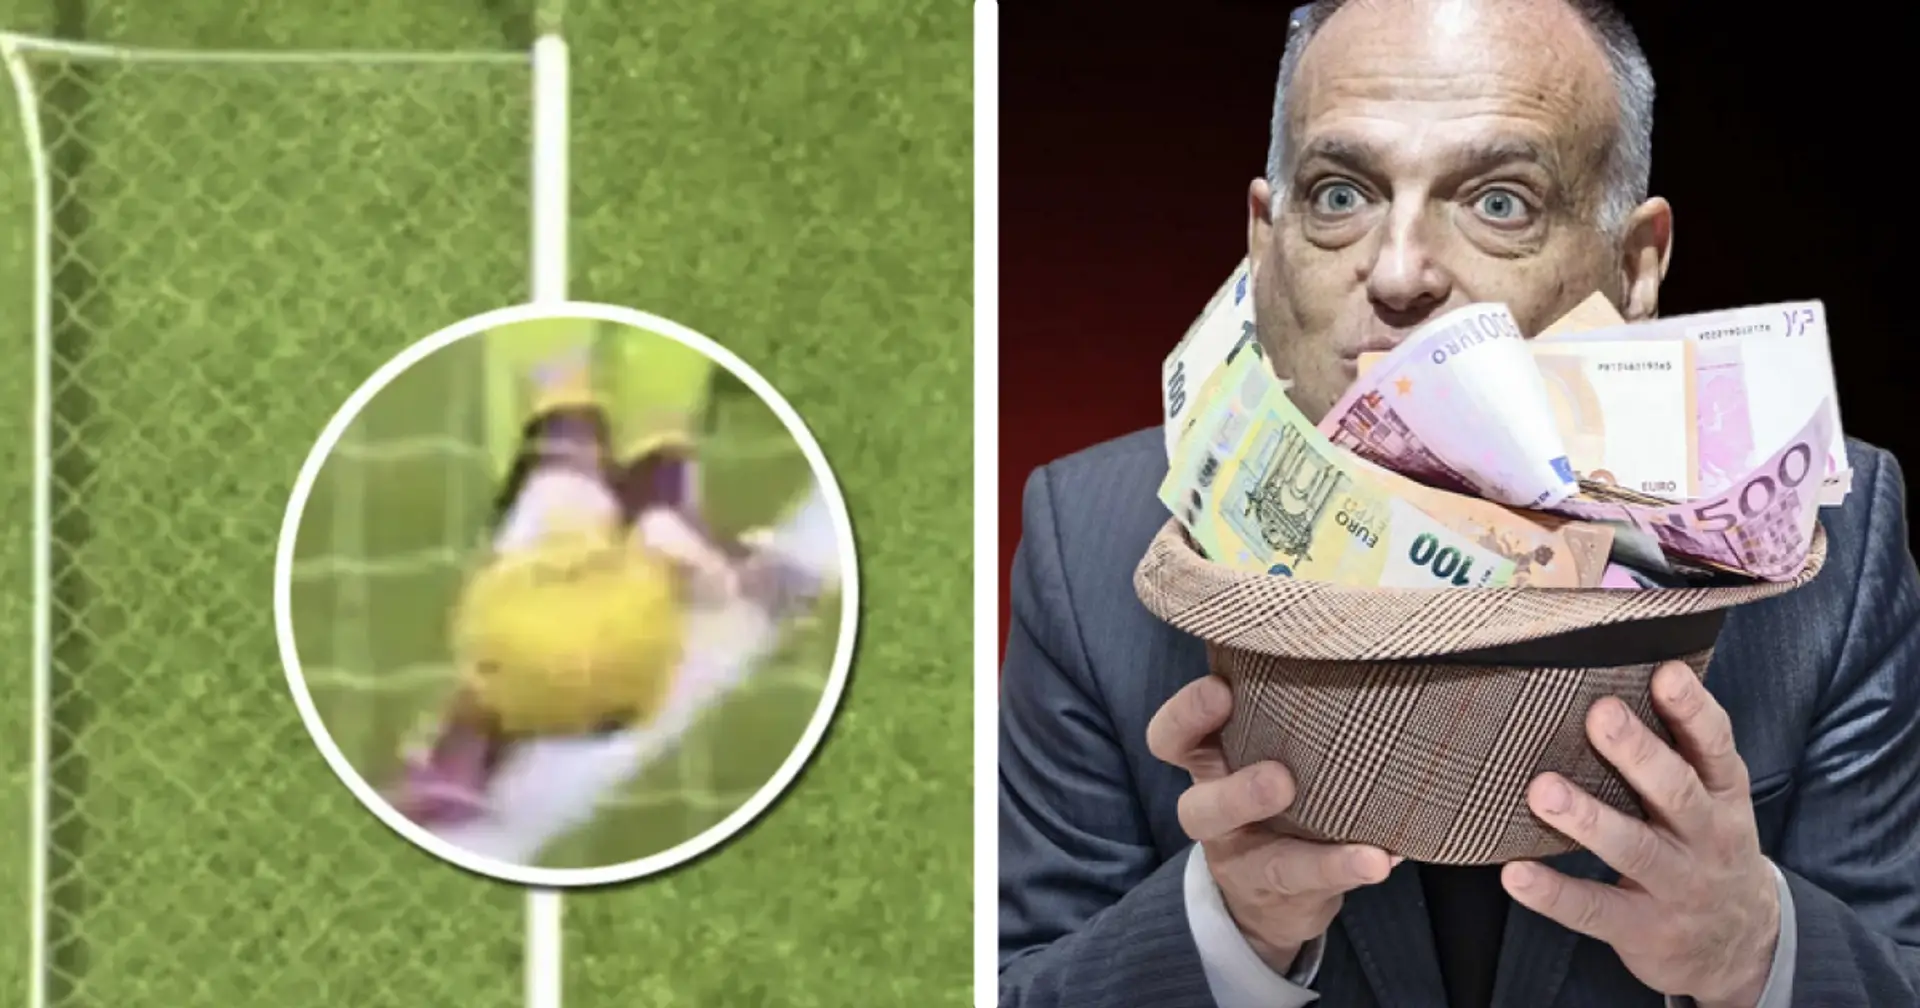 How much does it cost to install goal-line technology in La Liga? Less than Tebas earns